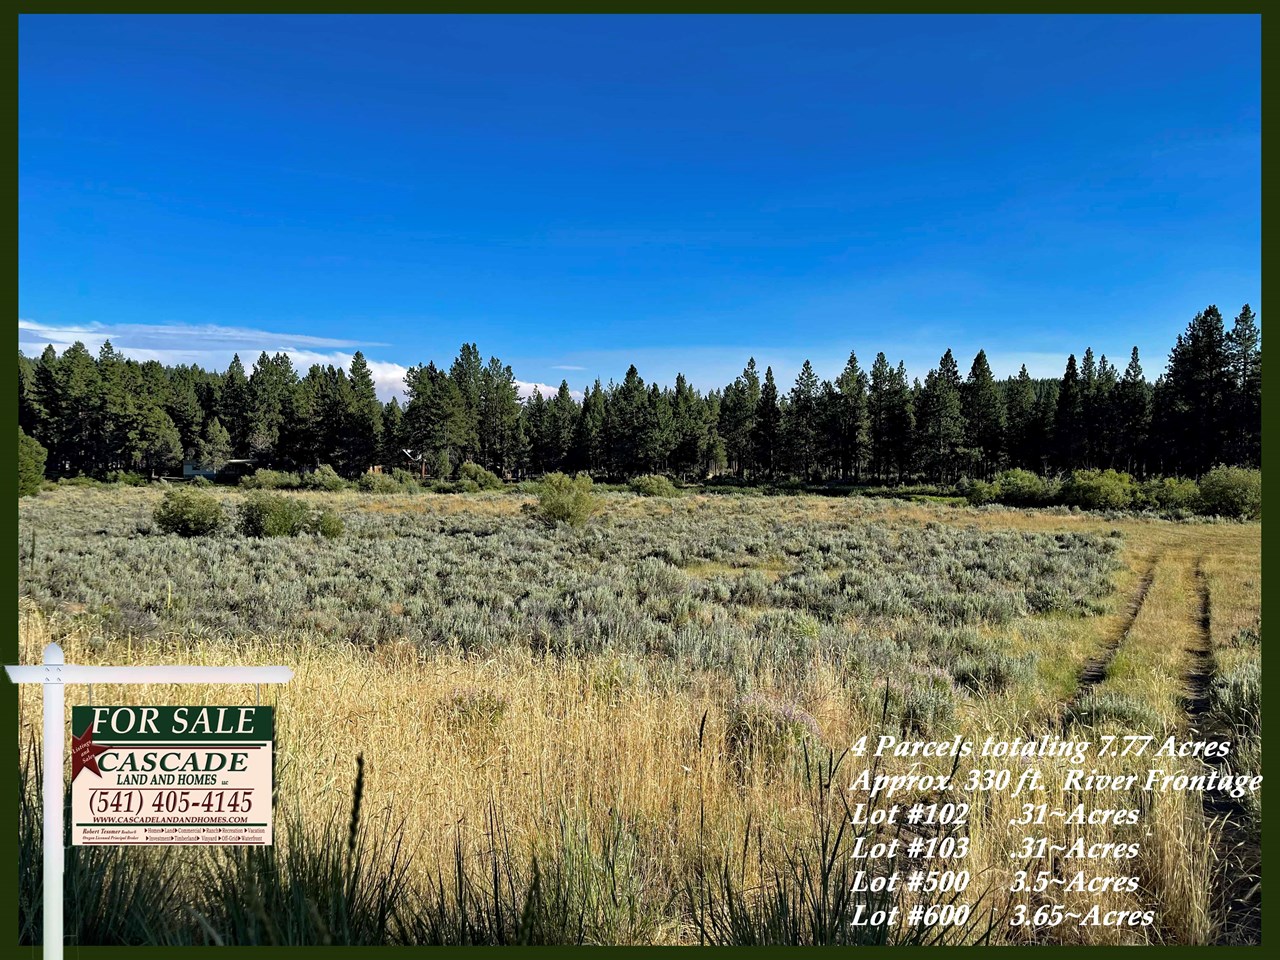 the property is four separate parcels that total 7.77 acres! with this property including four separate parcels, there is an opportunity for many possible uses and building sites. the two smaller parcels are zoned f, and the two larger are zoned r2. (see klamath county for zoning descriptions).




mls # 220156878 
lot #102, #103
2610/2620 south chiloquin road, chiloquin, oregon